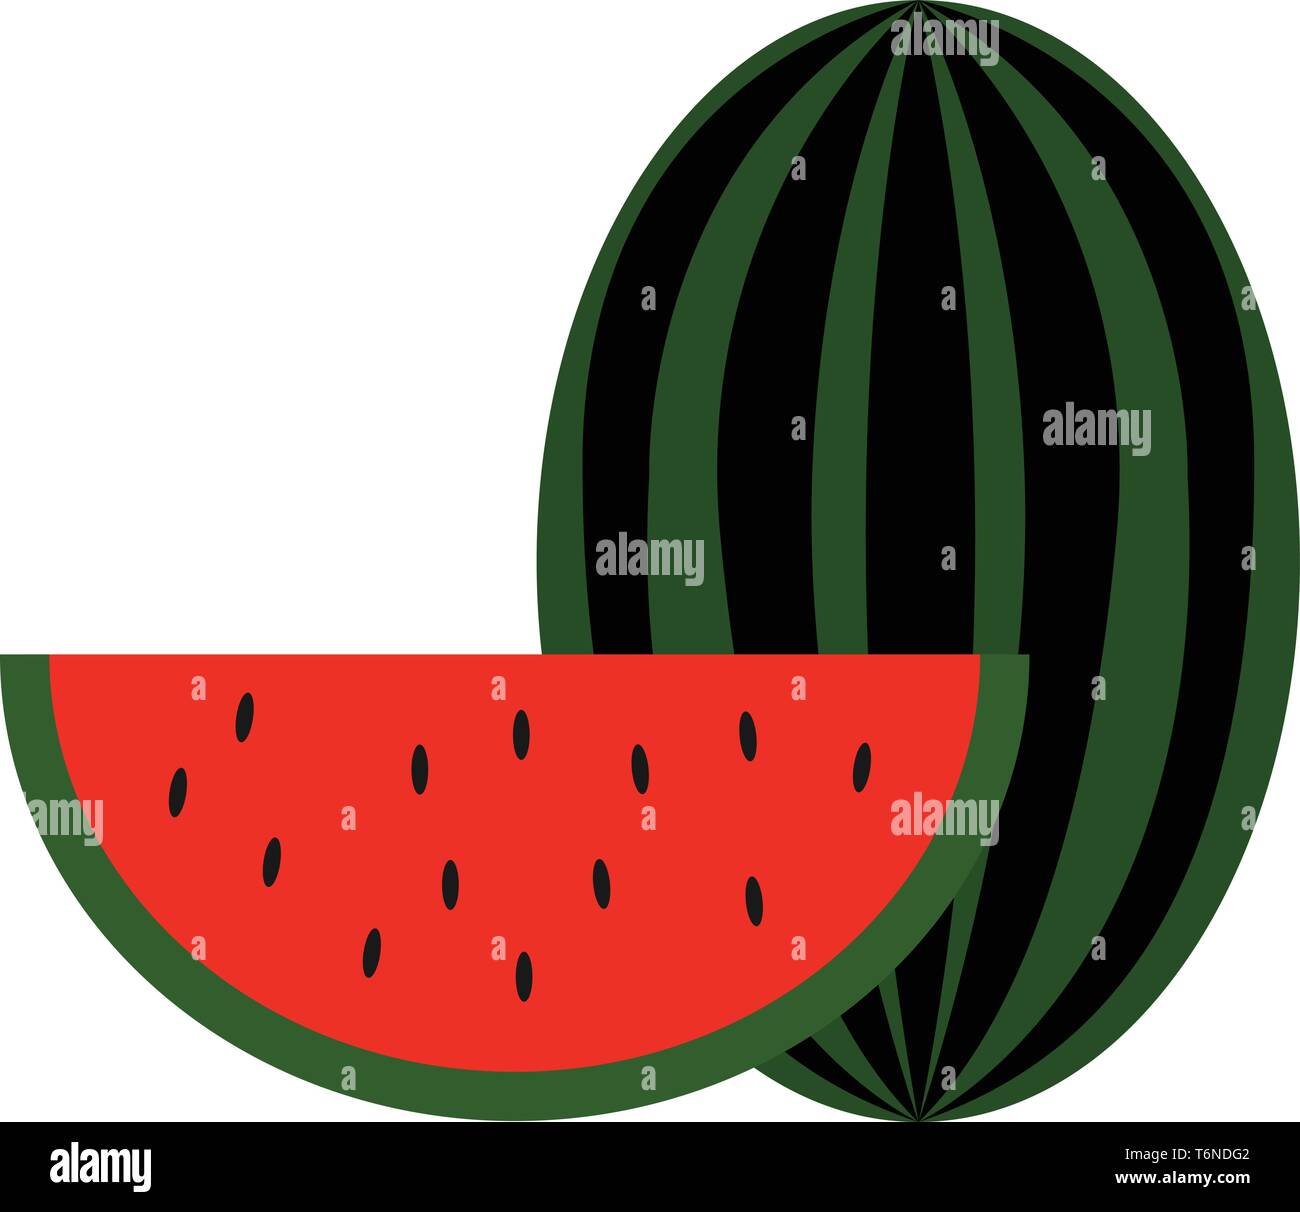 Clipart of a big watermelon and a slice of it with smooth green skin  red pulp  watery juice and black seeds exposed  vector  color drawing or illustr Stock Vector